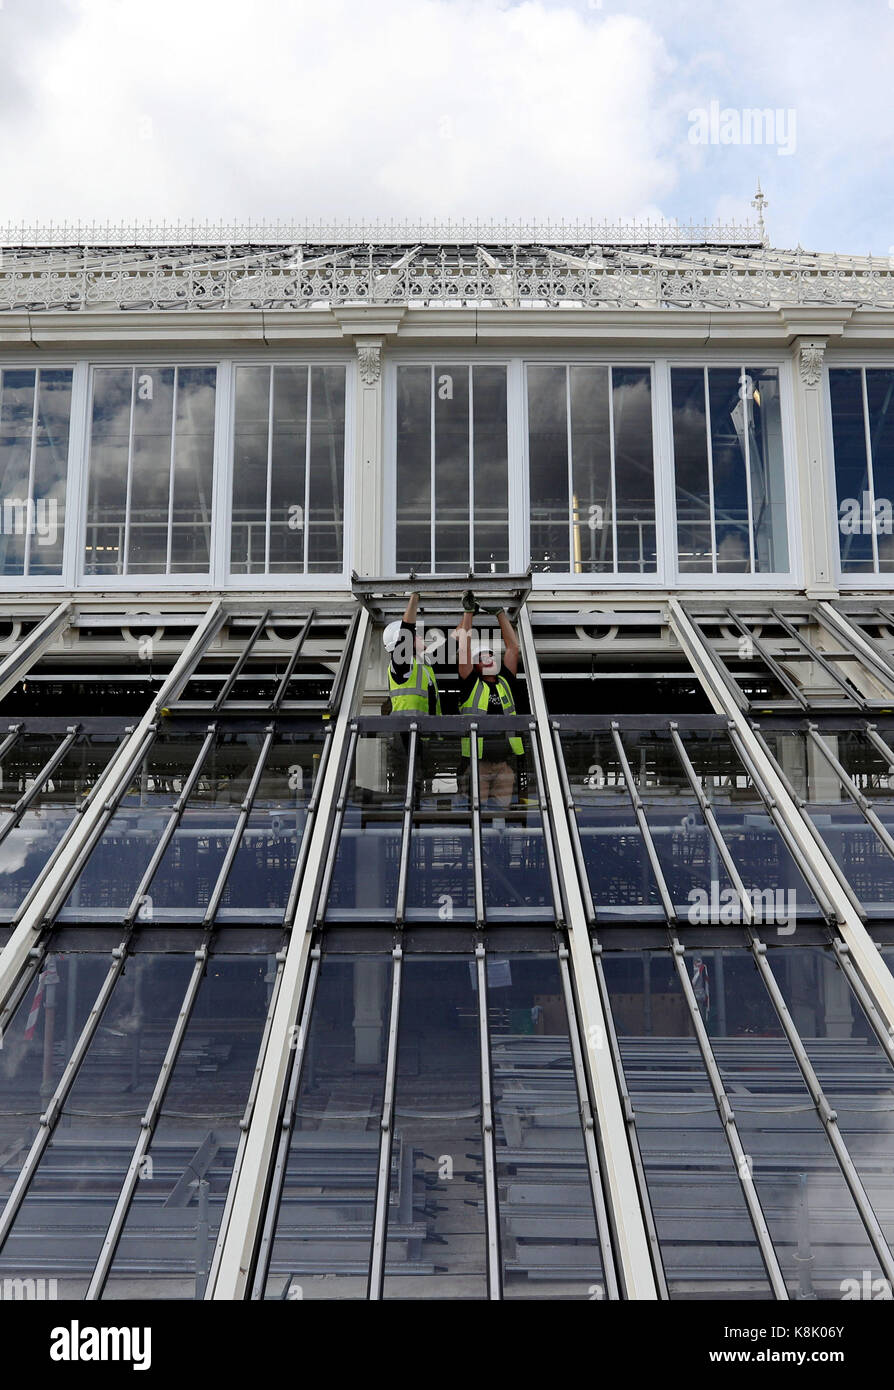 Workmen in the Royal Botanic Gardens in Kew, SW London, adjust the windows on the Temperate House that will re-open in May next year after the &Acirc;£41 million five year restoration project of the world's largest Victorian Glasshouse, which was designed by Decimus Burton and opened in 1863. Stock Photo